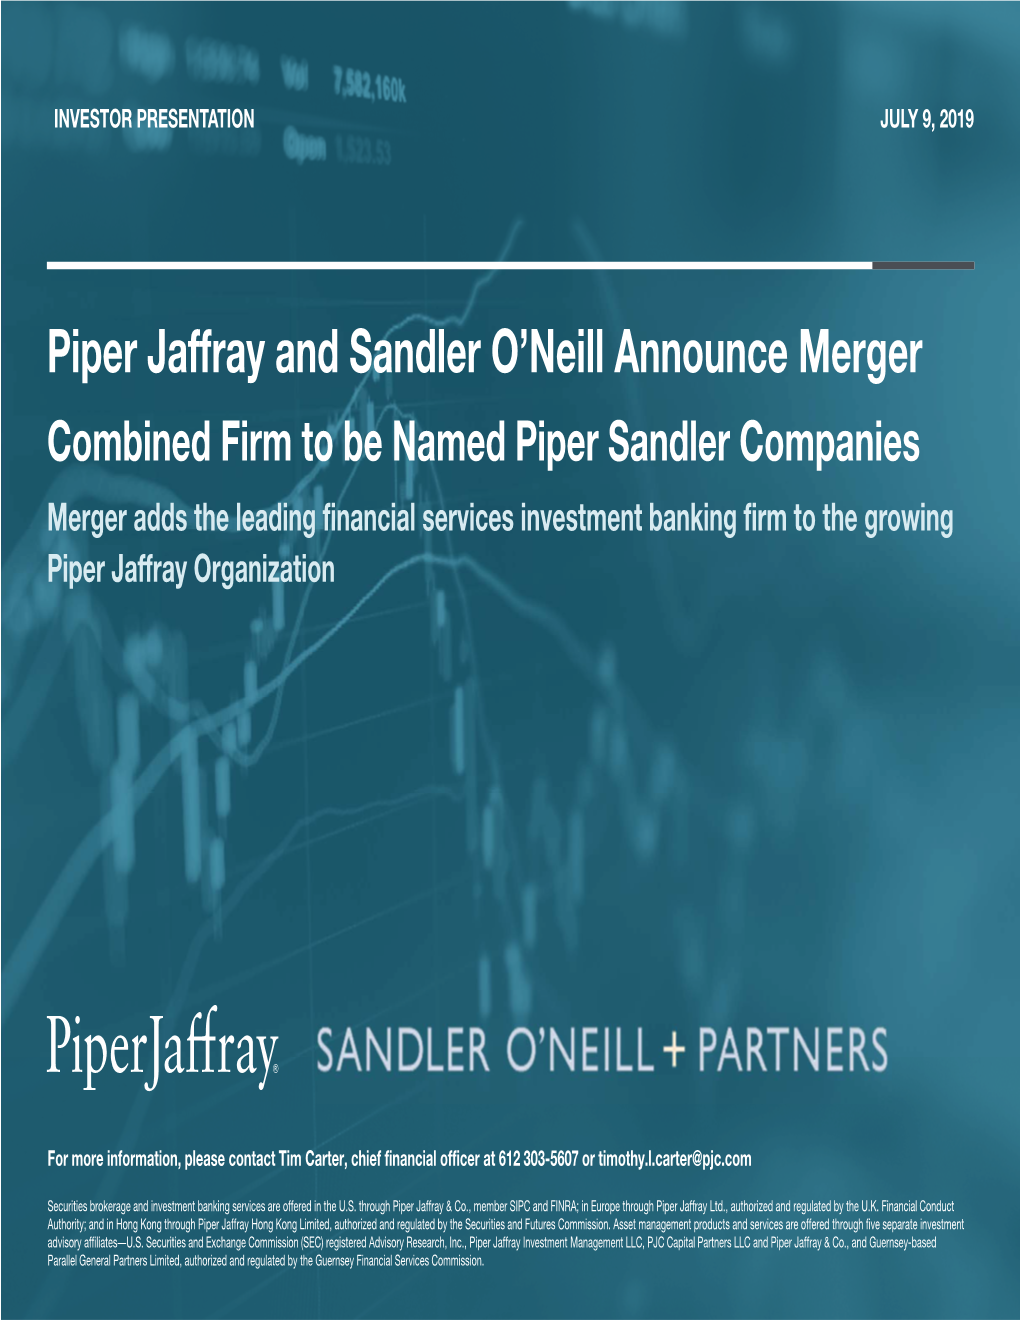 Piper Jaffray and Sandler O'neill Announce Merger